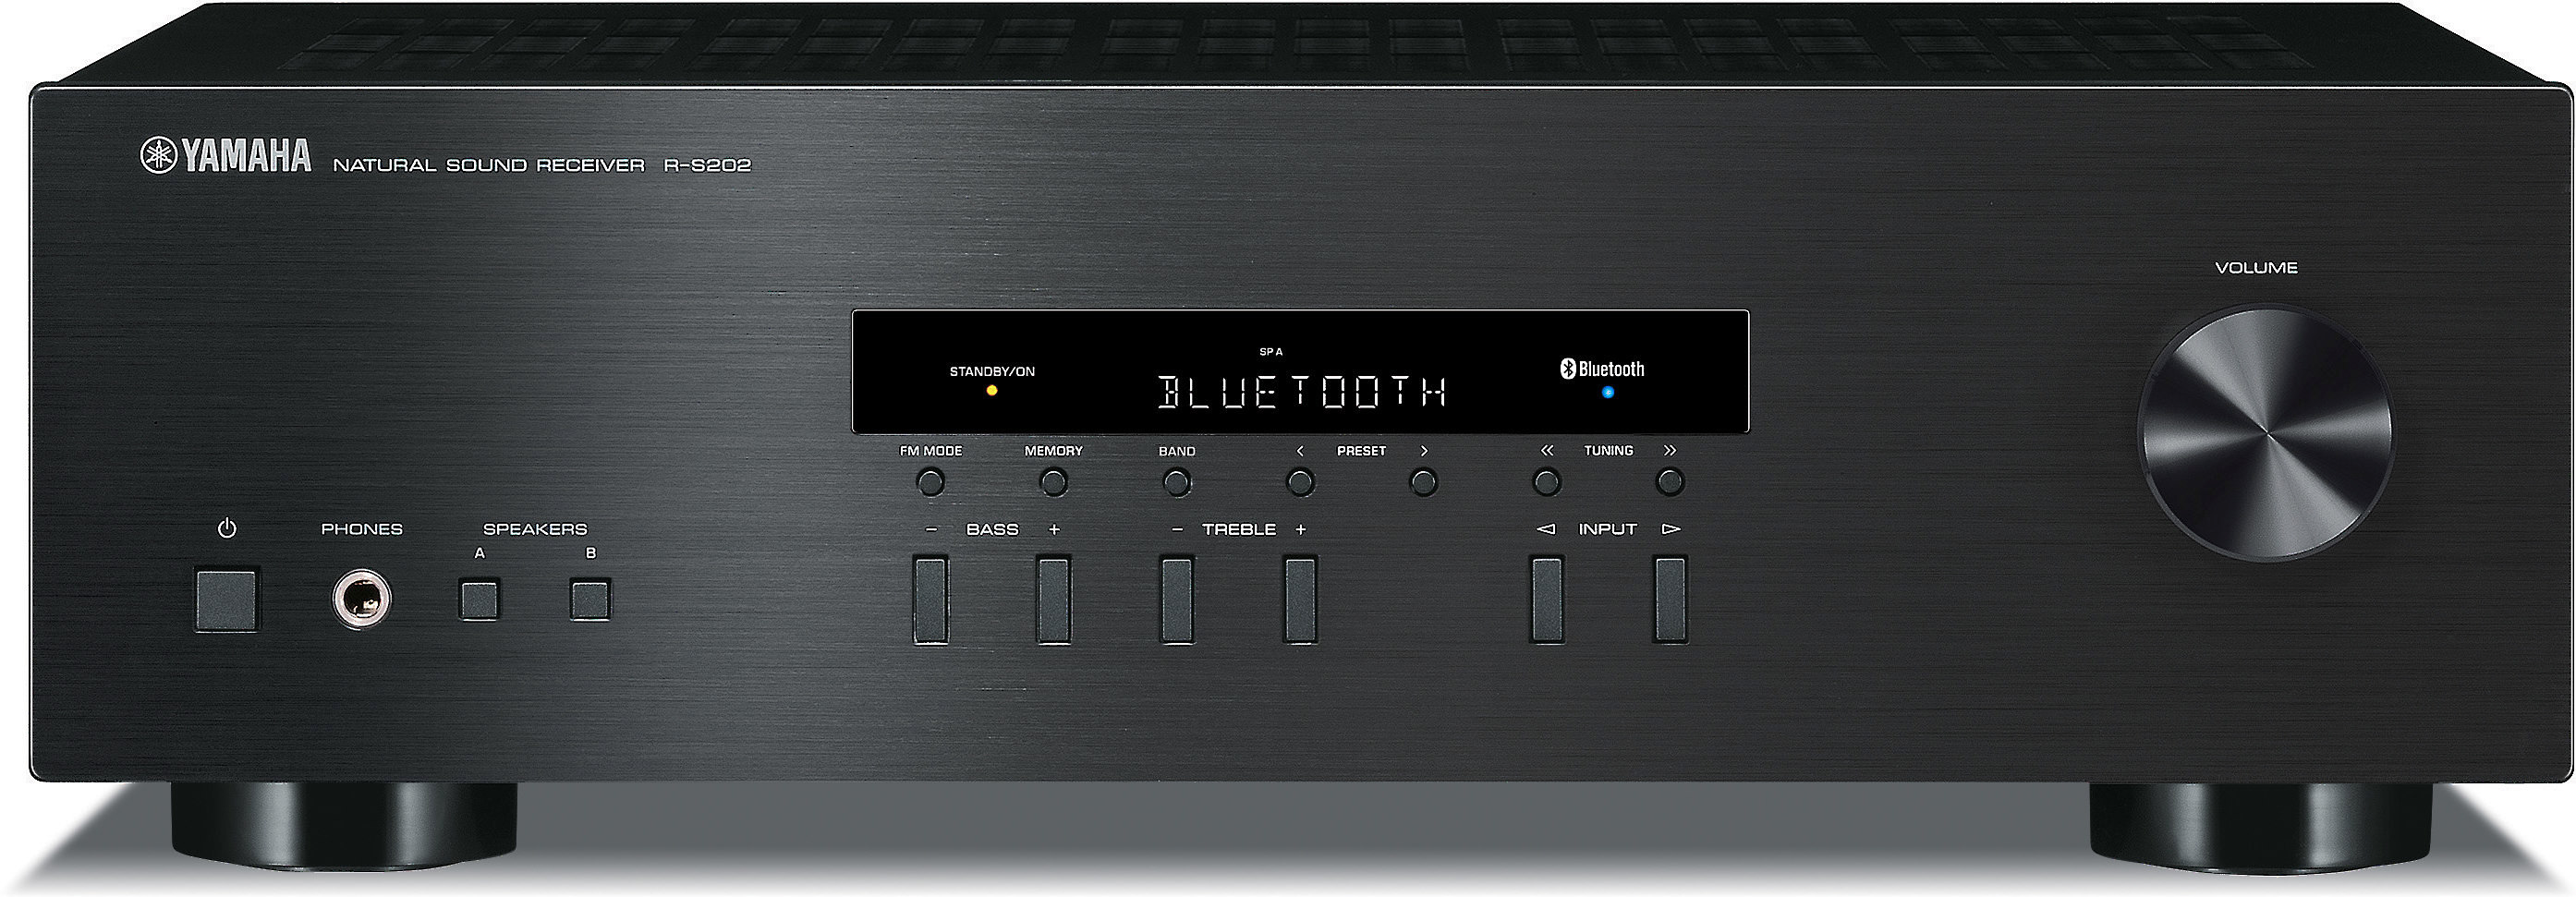 Customer Reviews: Yamaha R-S202 Stereo receiver with Bluetooth® at  Crutchfield